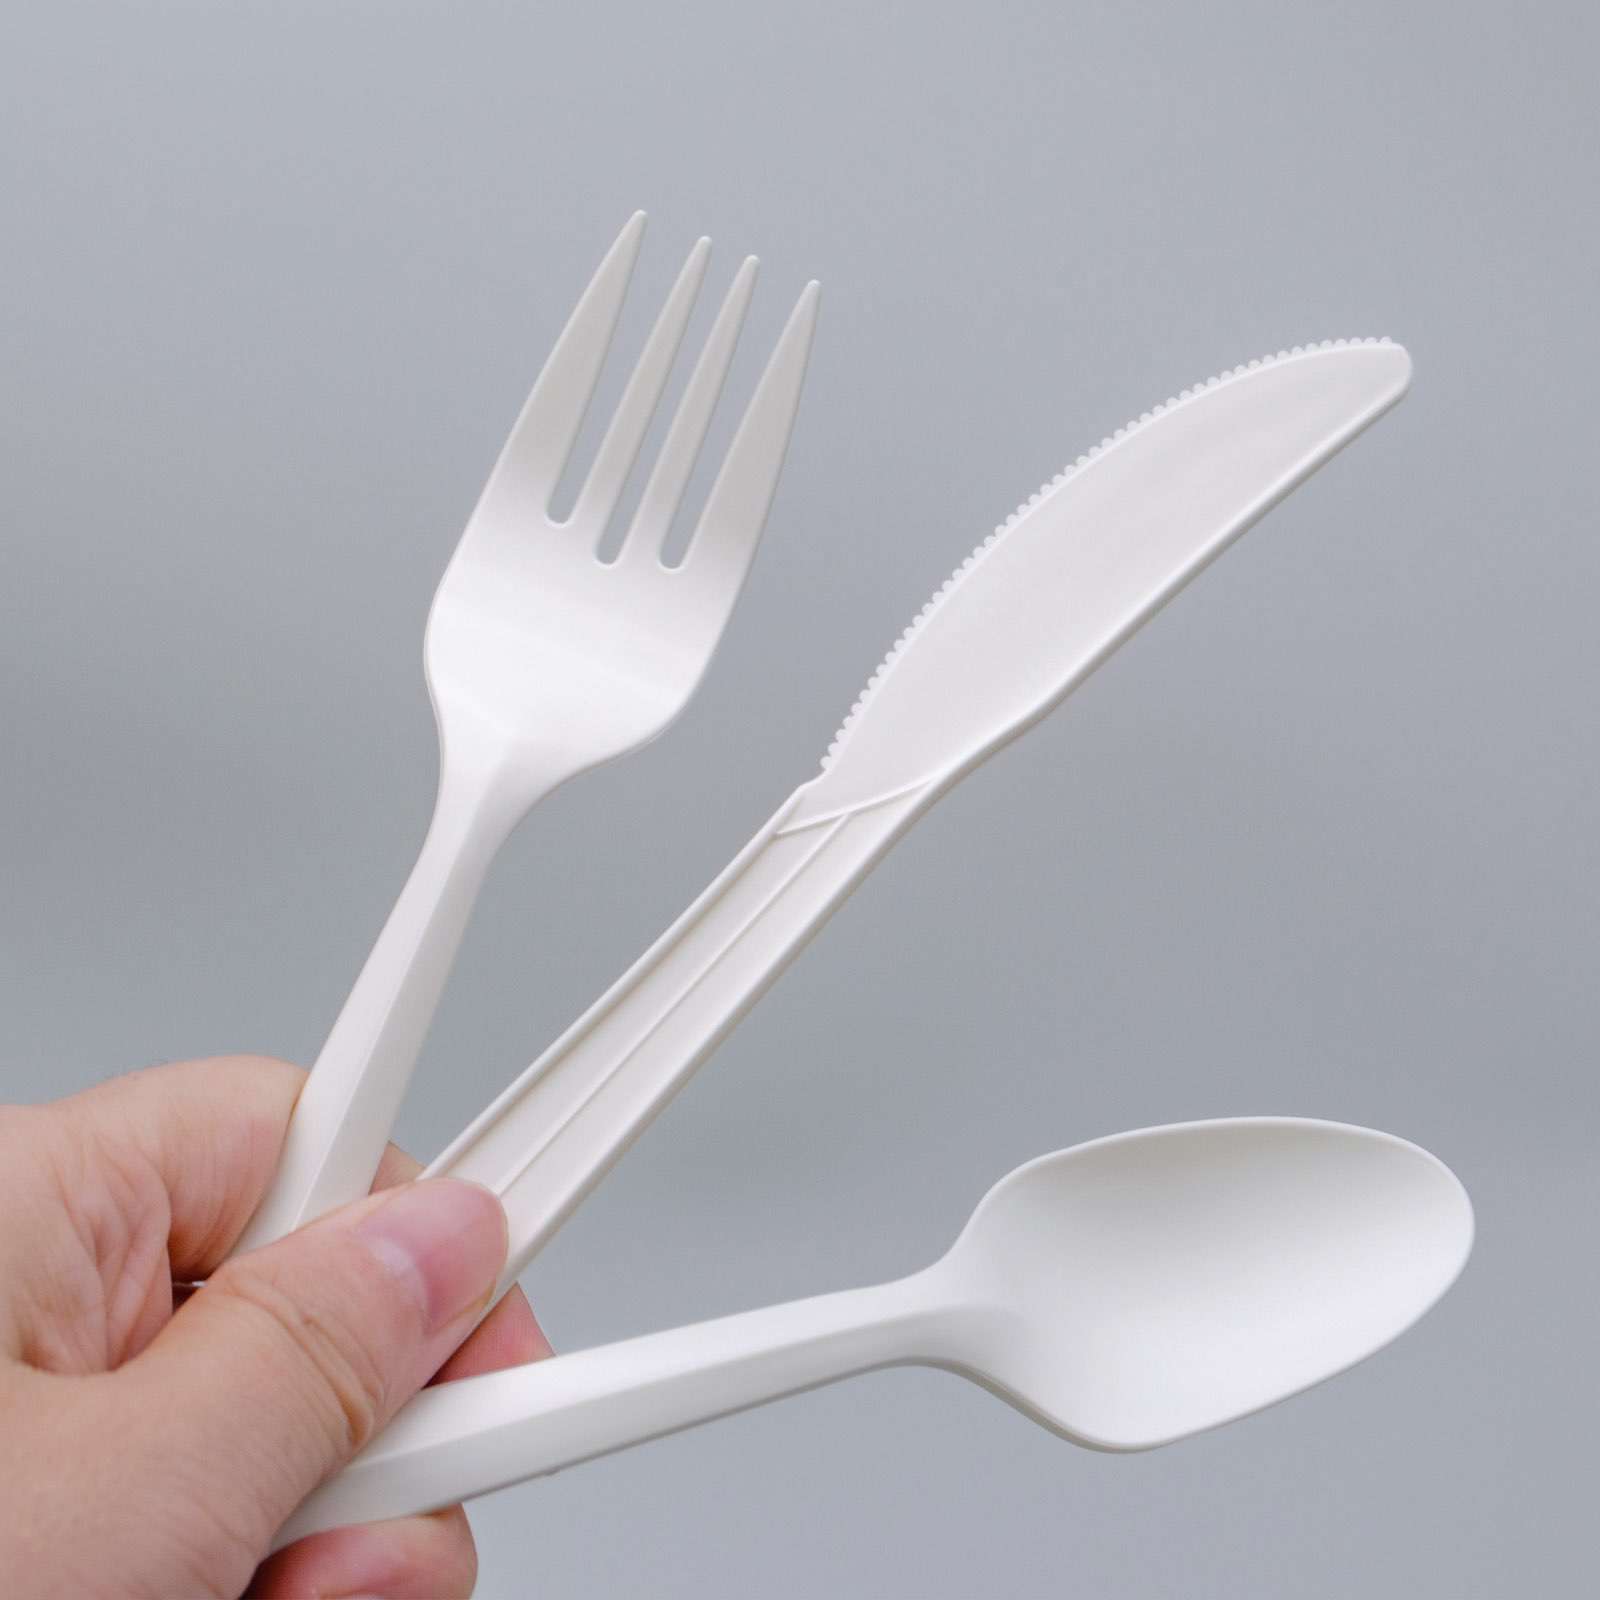 Disposable knife, fork and spoon picnic party